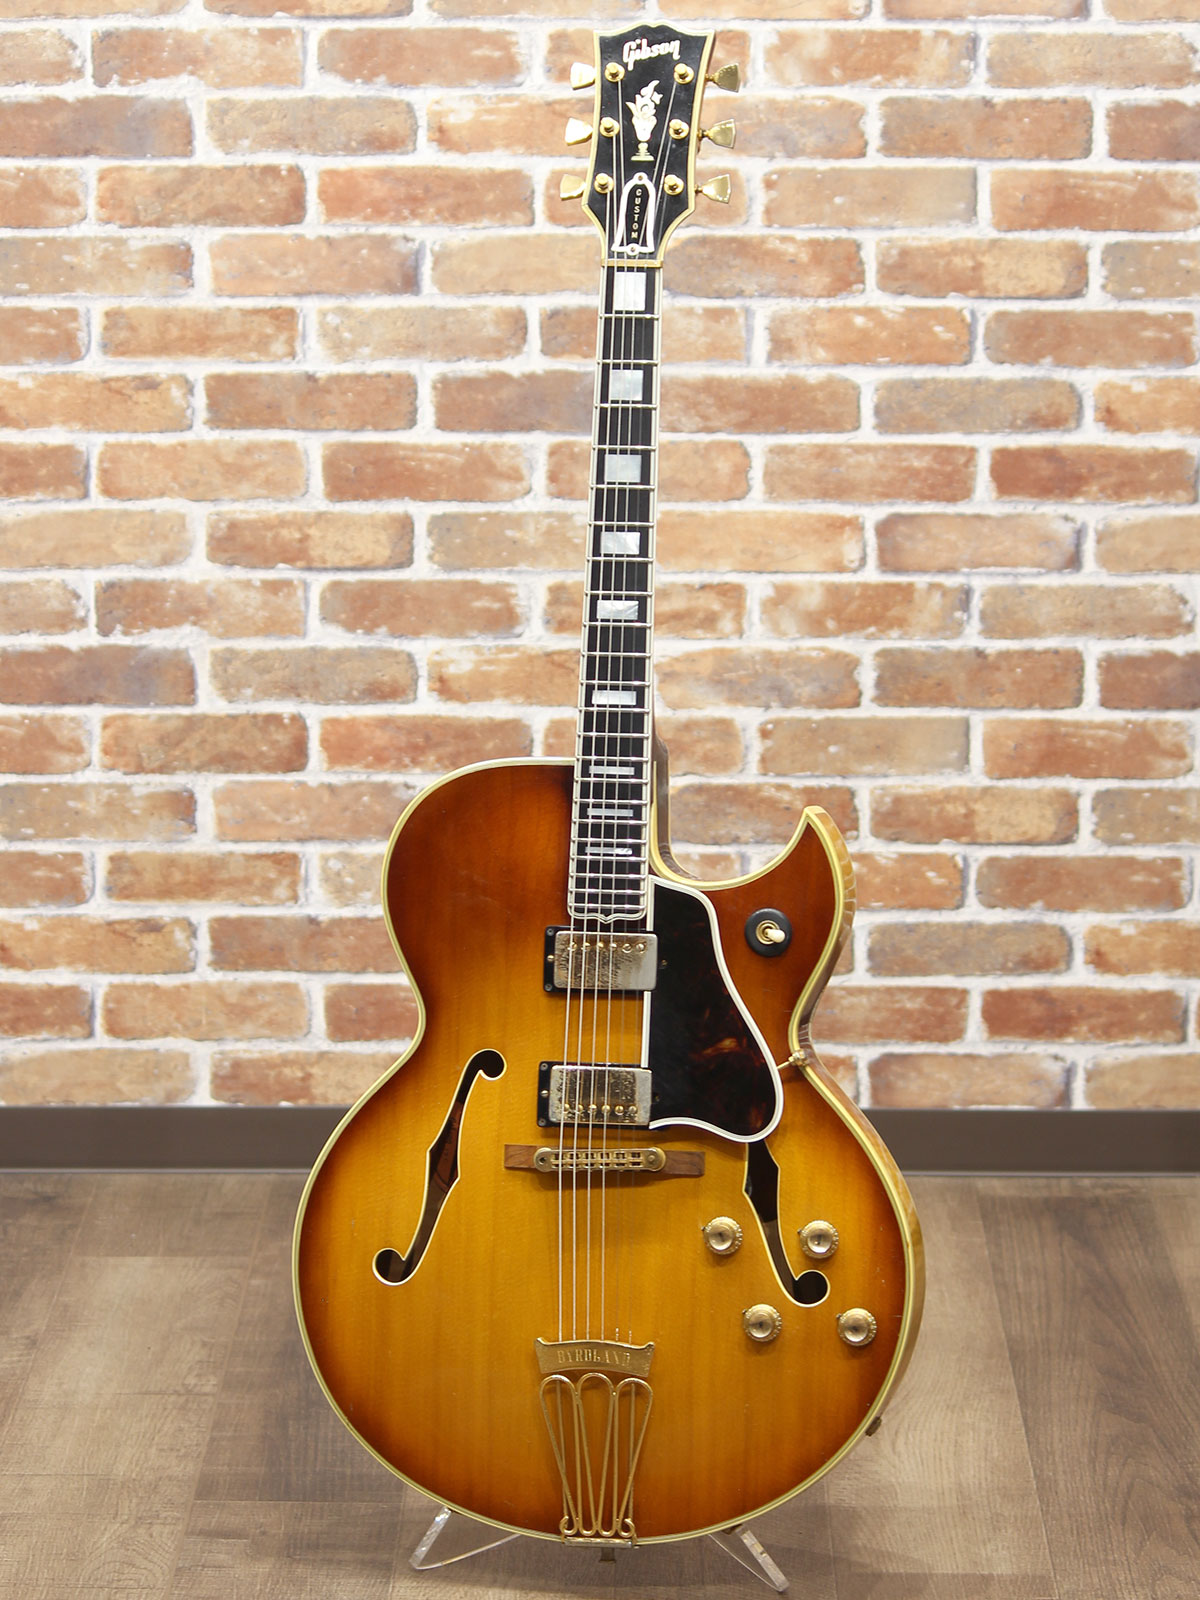 Gibson 1962-63 Byrdland ” owned by Jim Messina” - 13.jpg